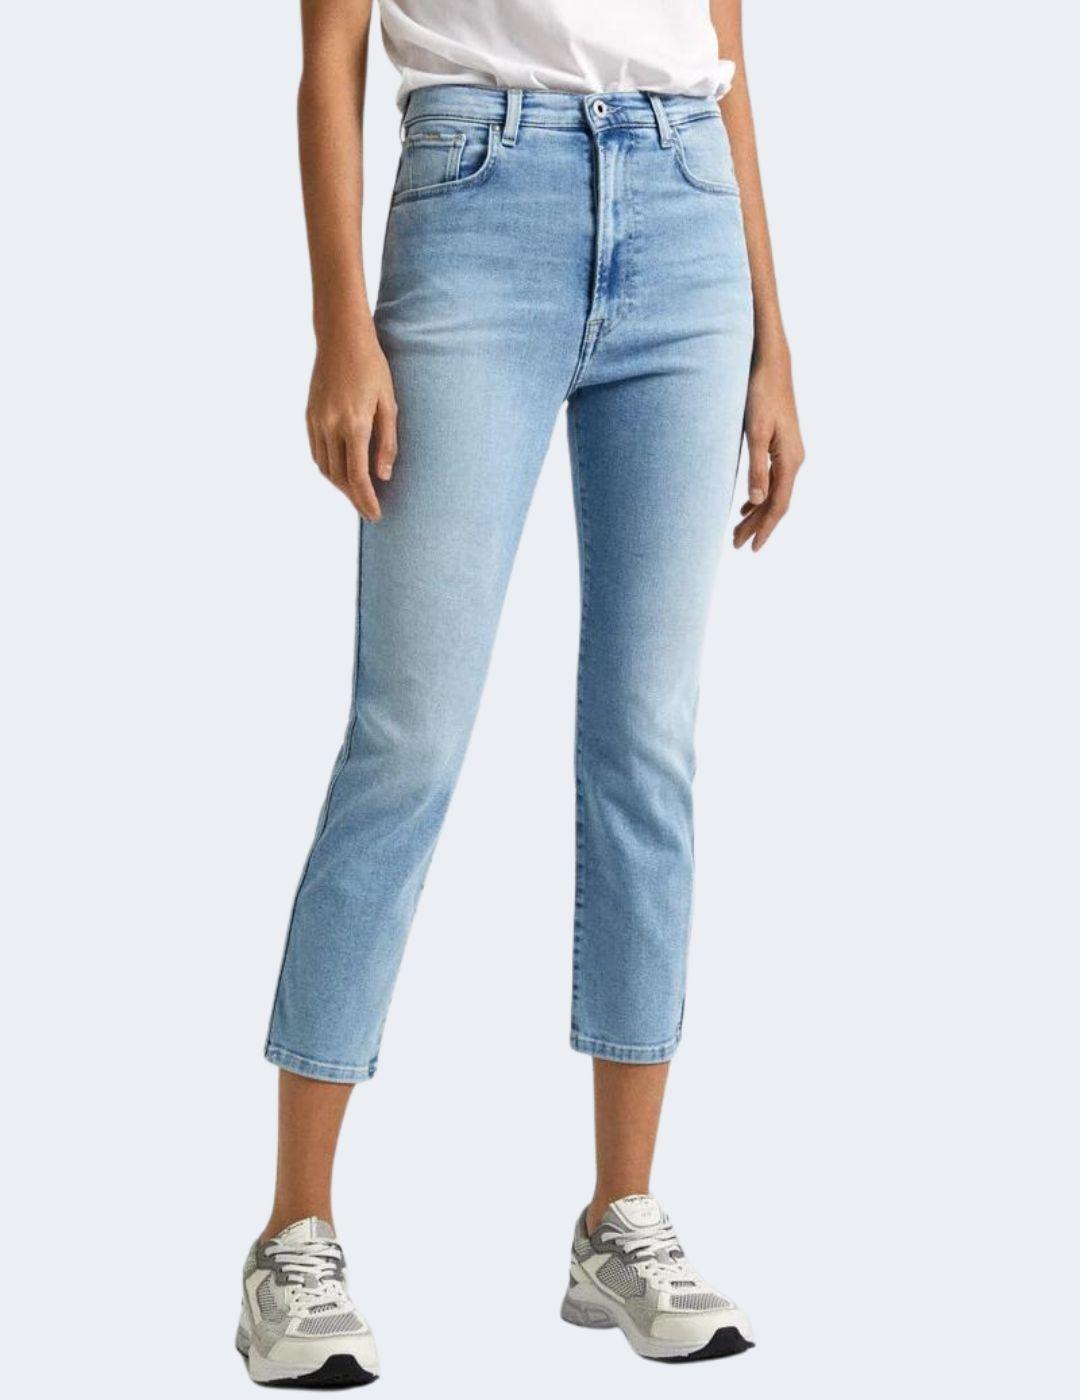 Jeans Pepe Jeans Mujer Slim Uhw 7/8